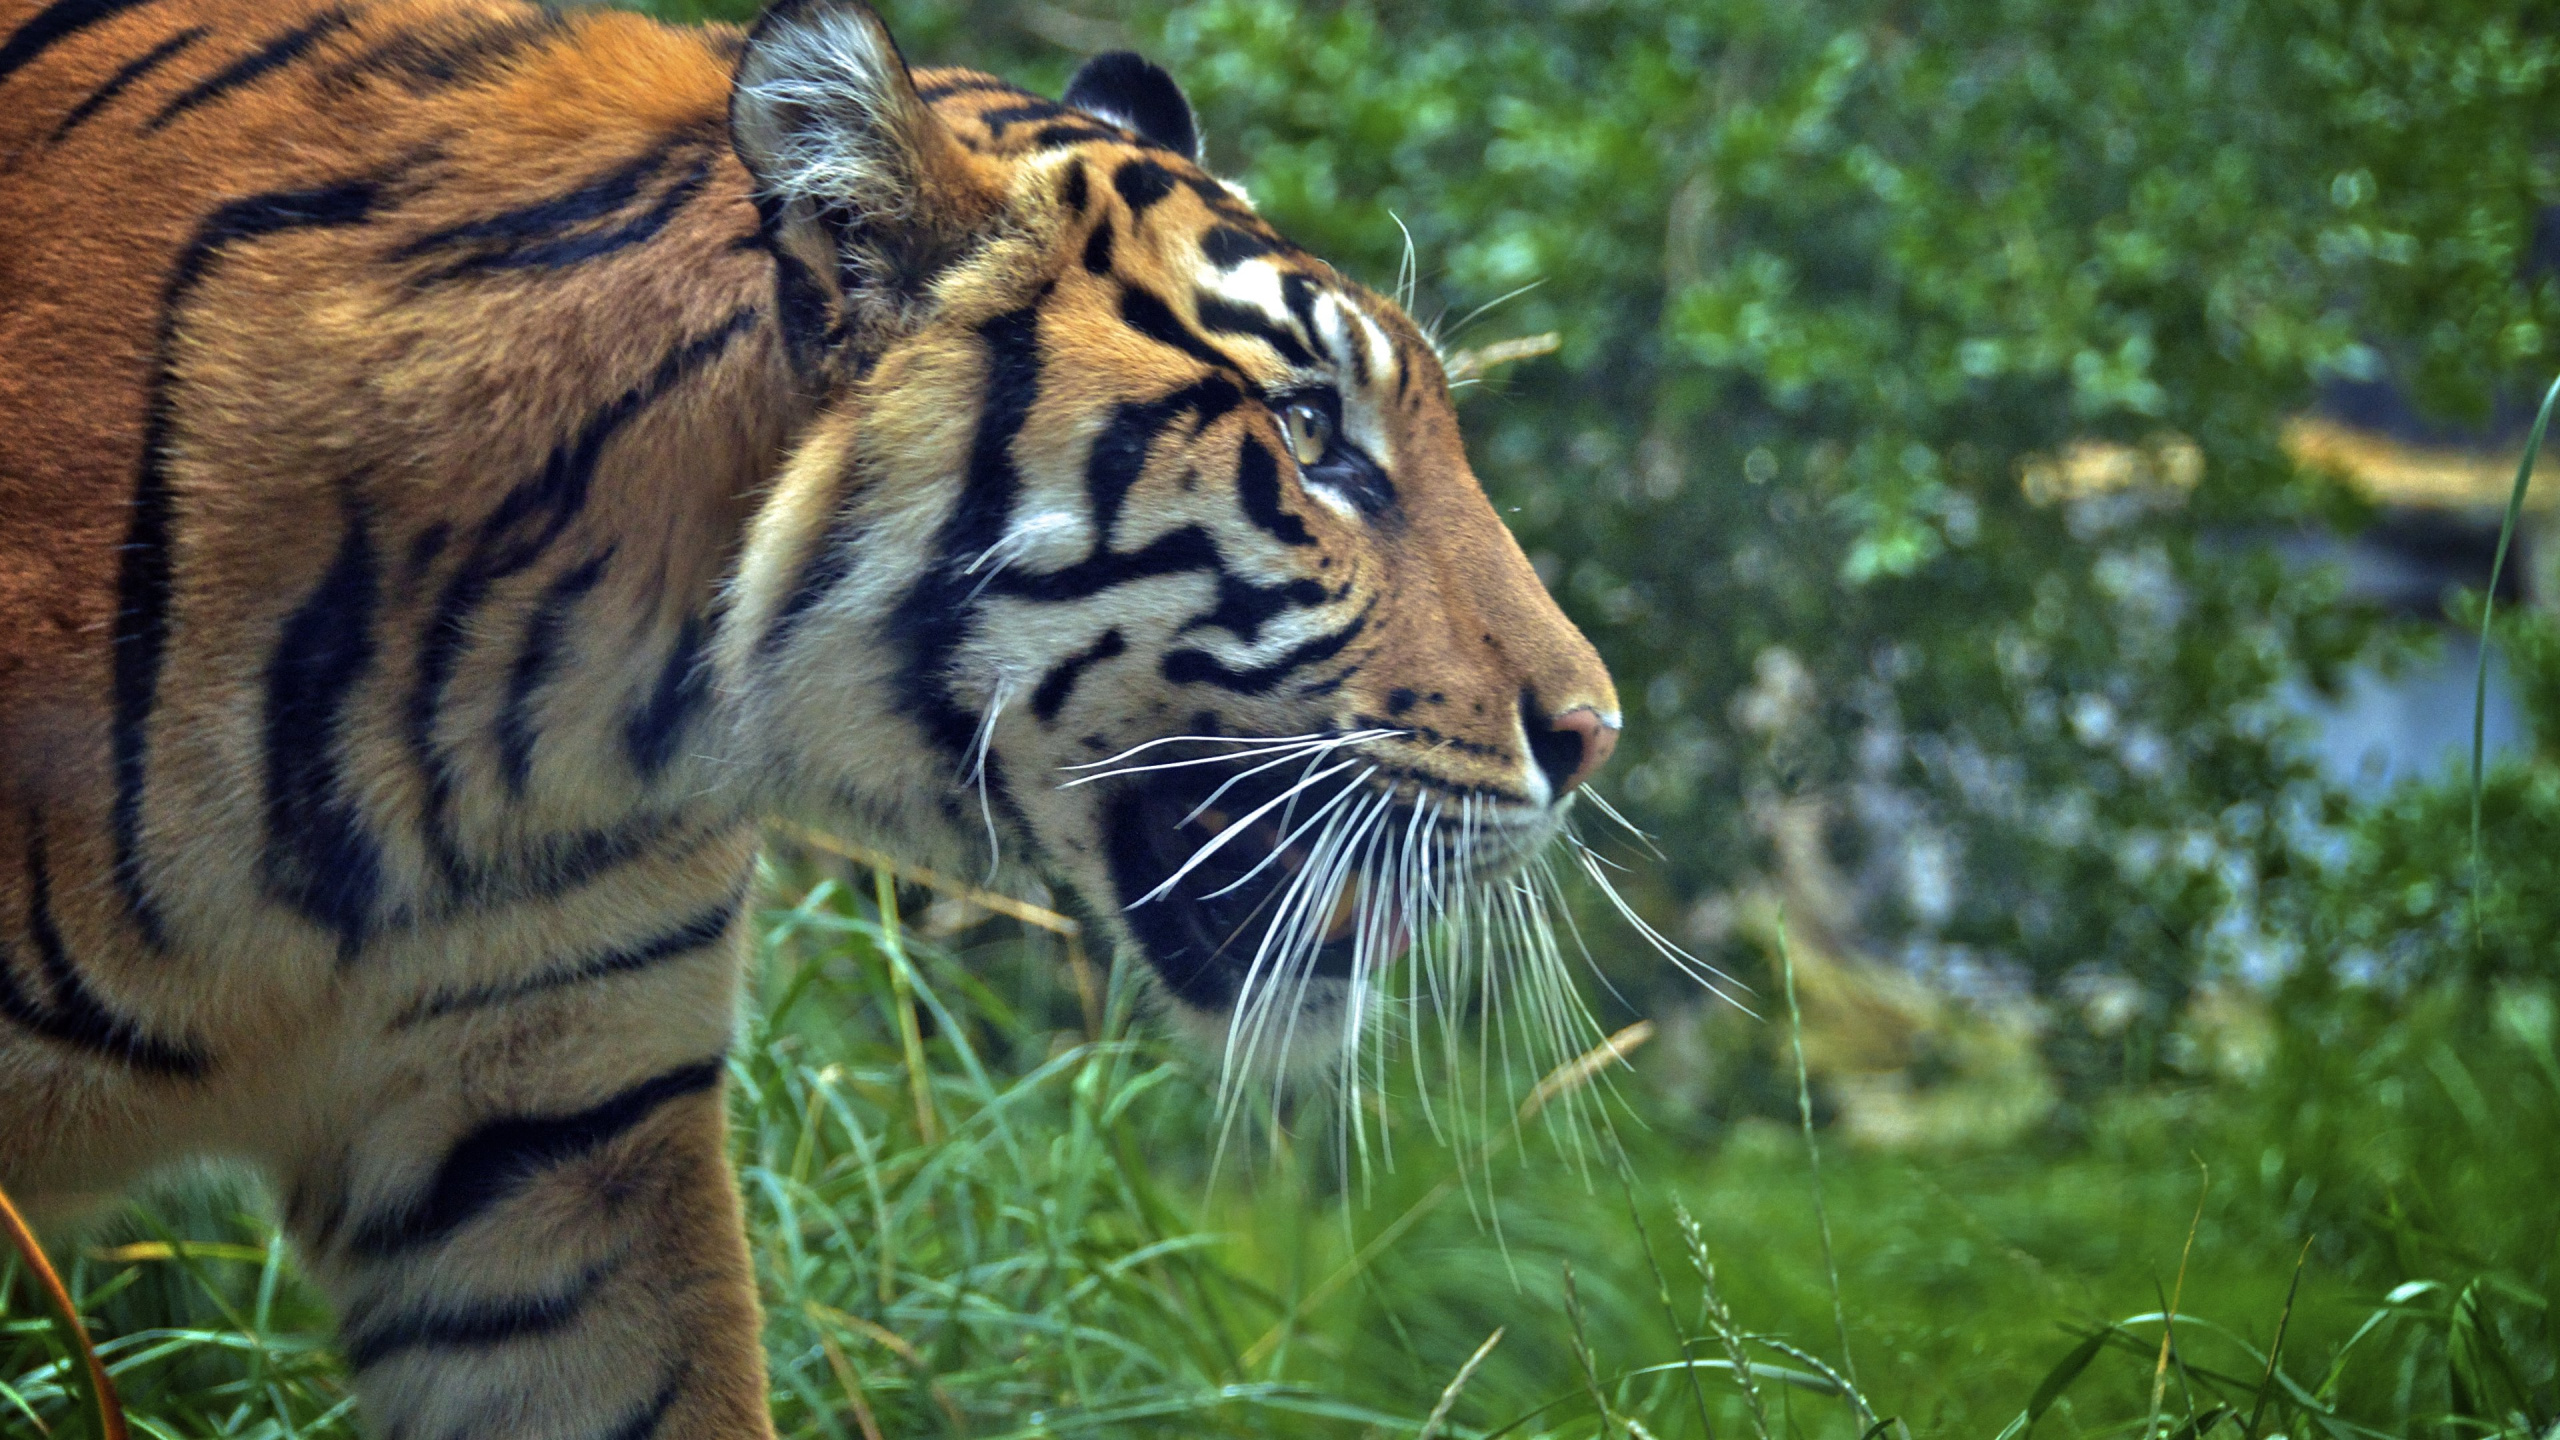 Brown and Black Tiger on Green Grass During Daytime. Wallpaper in 2560x1440 Resolution